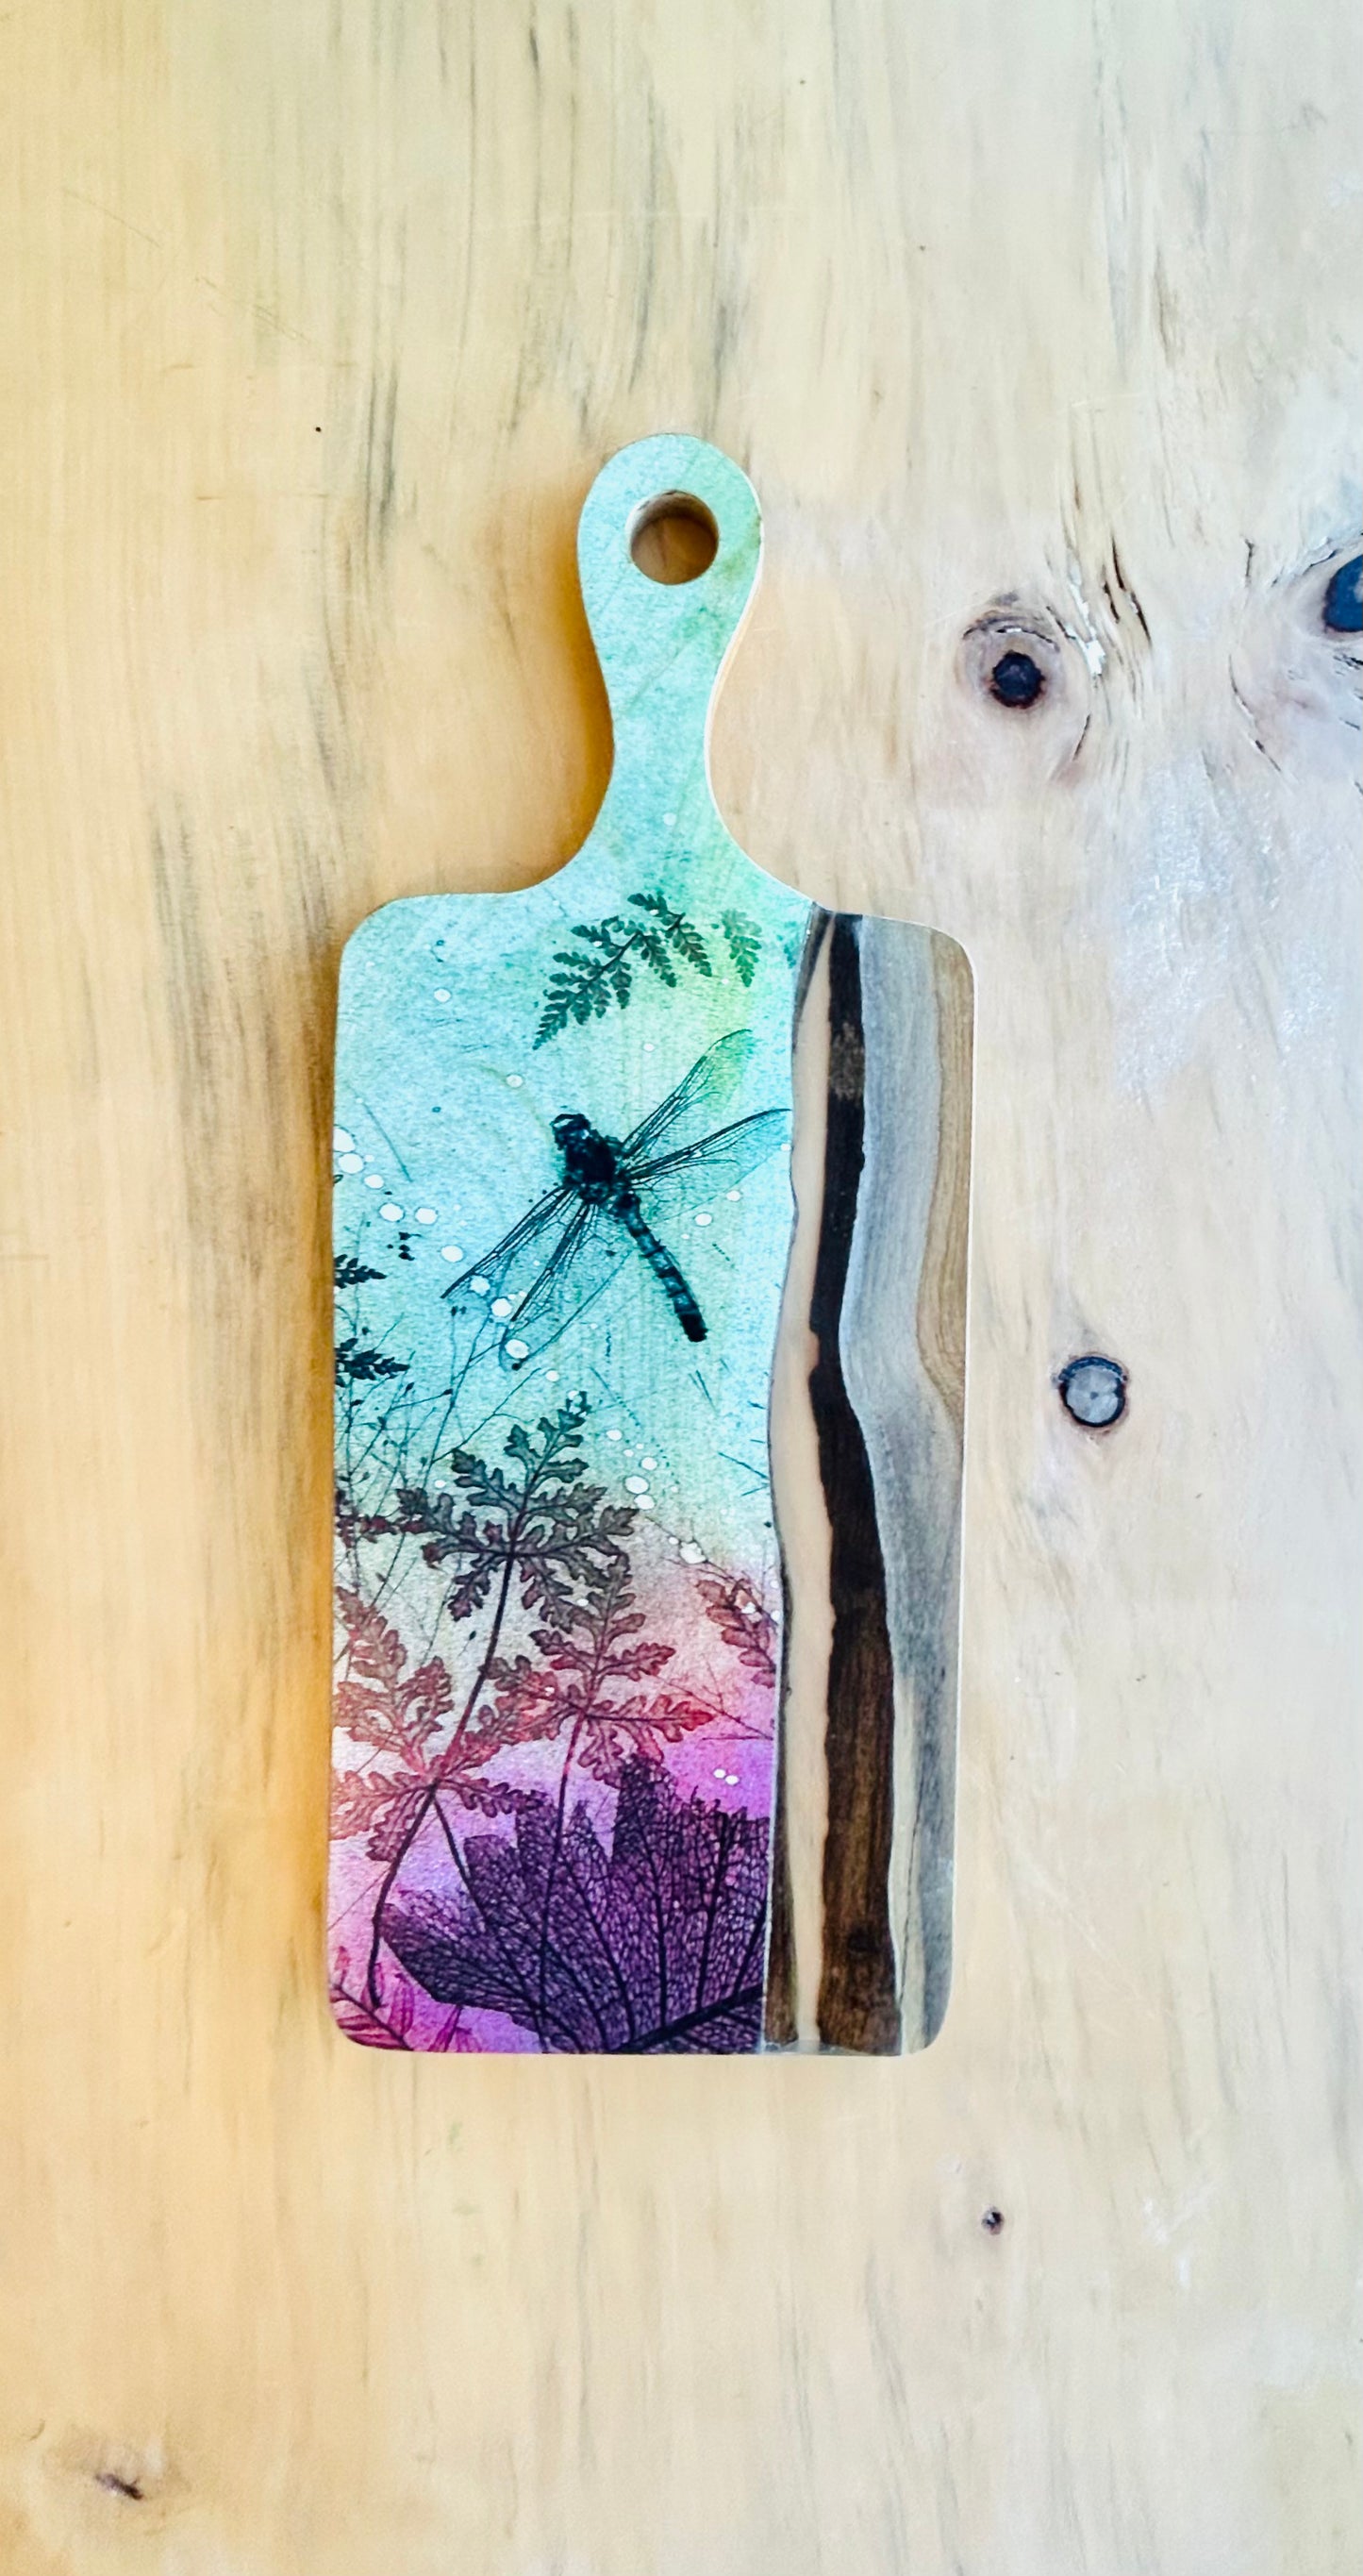 Wood and Resin Serving Board - Bliss Dragonfly